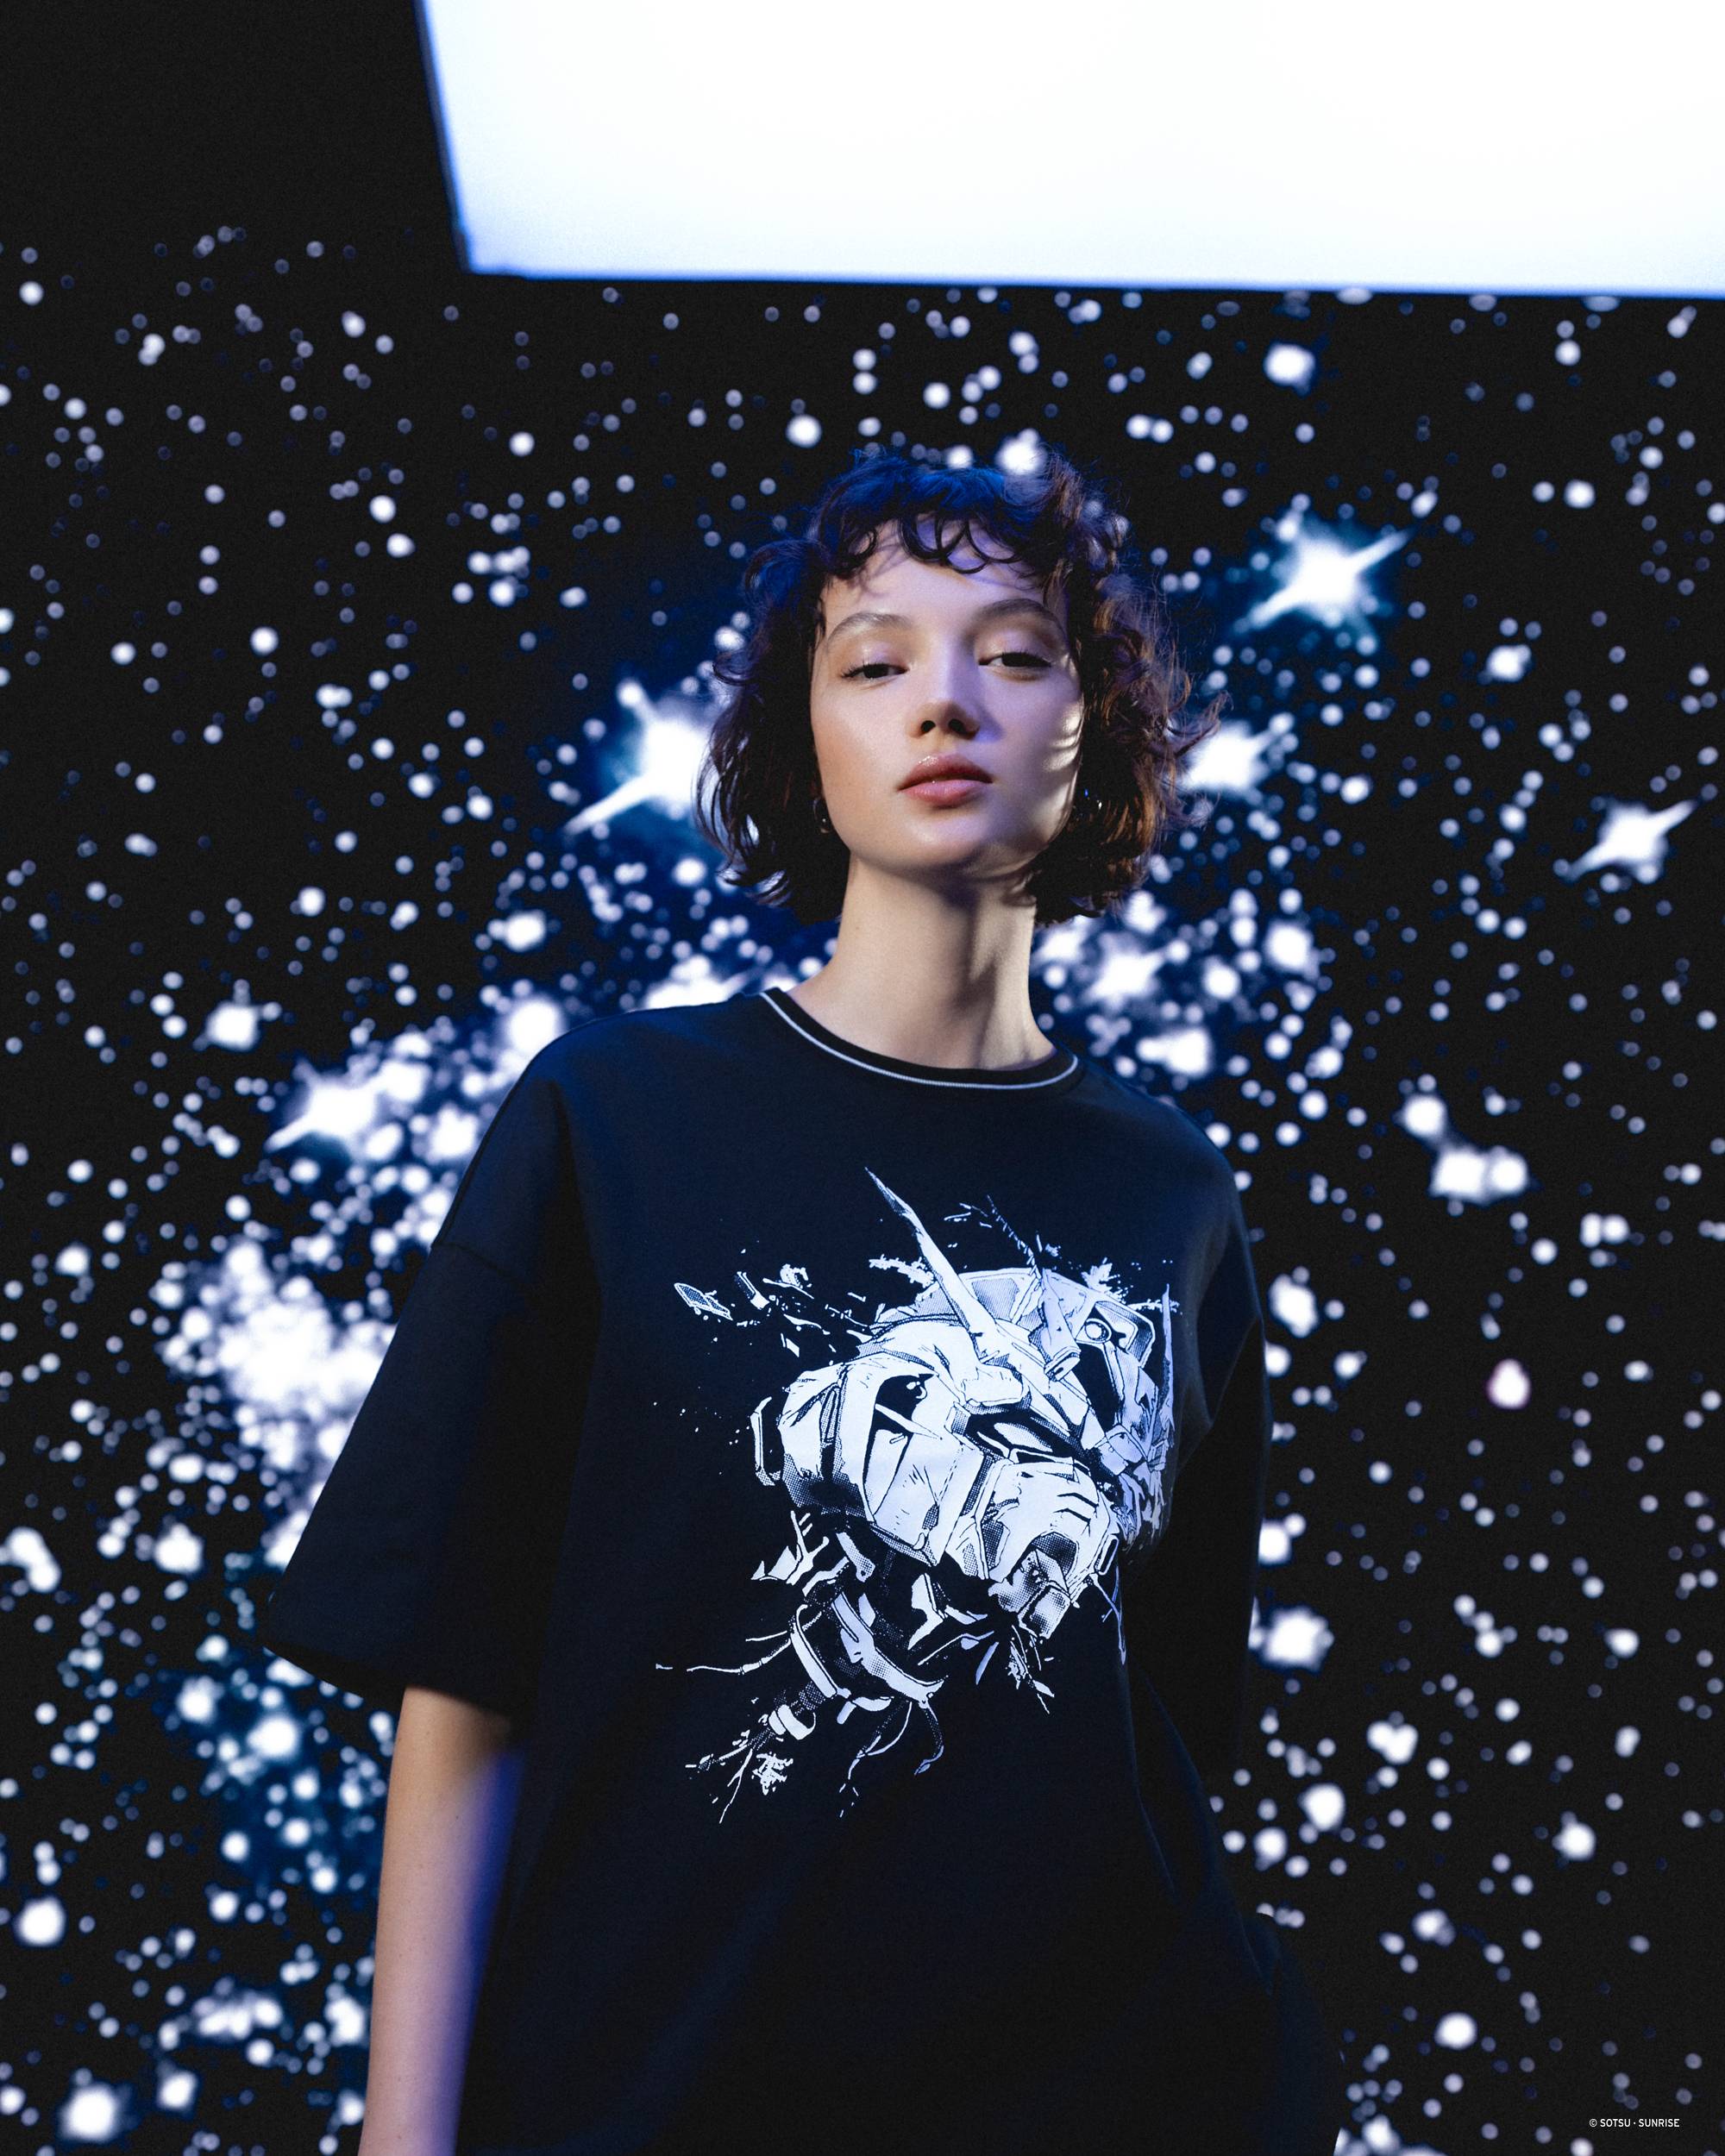 Image of woman wearing futuristic clothing and posing against dark and starry background